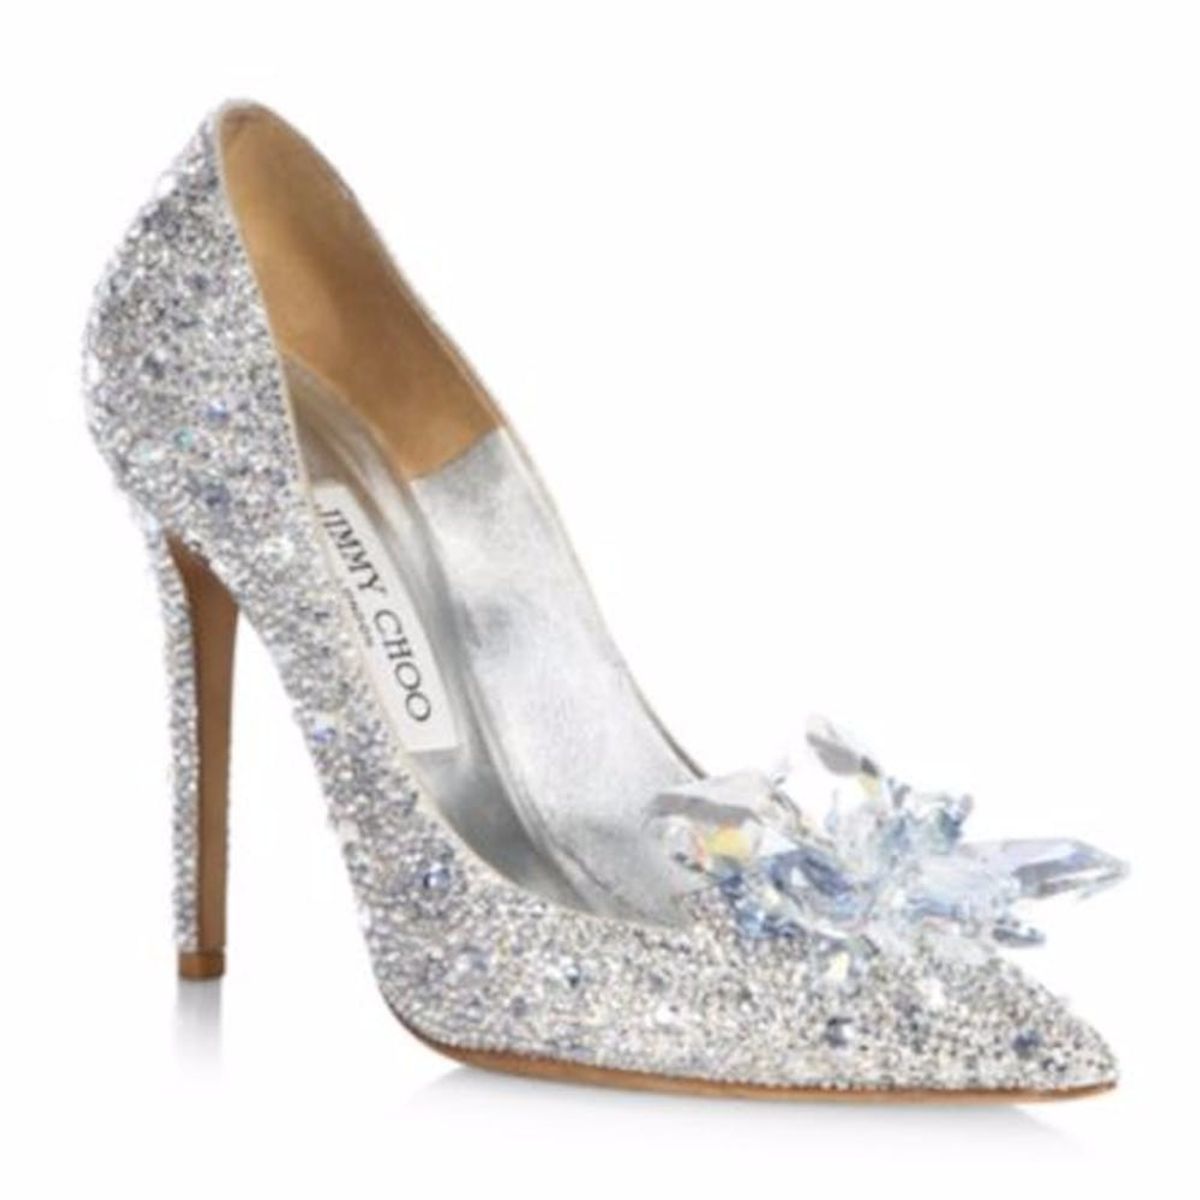 20 Pairs of Jaw-Dropping Shoes from Saks Fifth Avenue’s Exclusive Birthday Collection